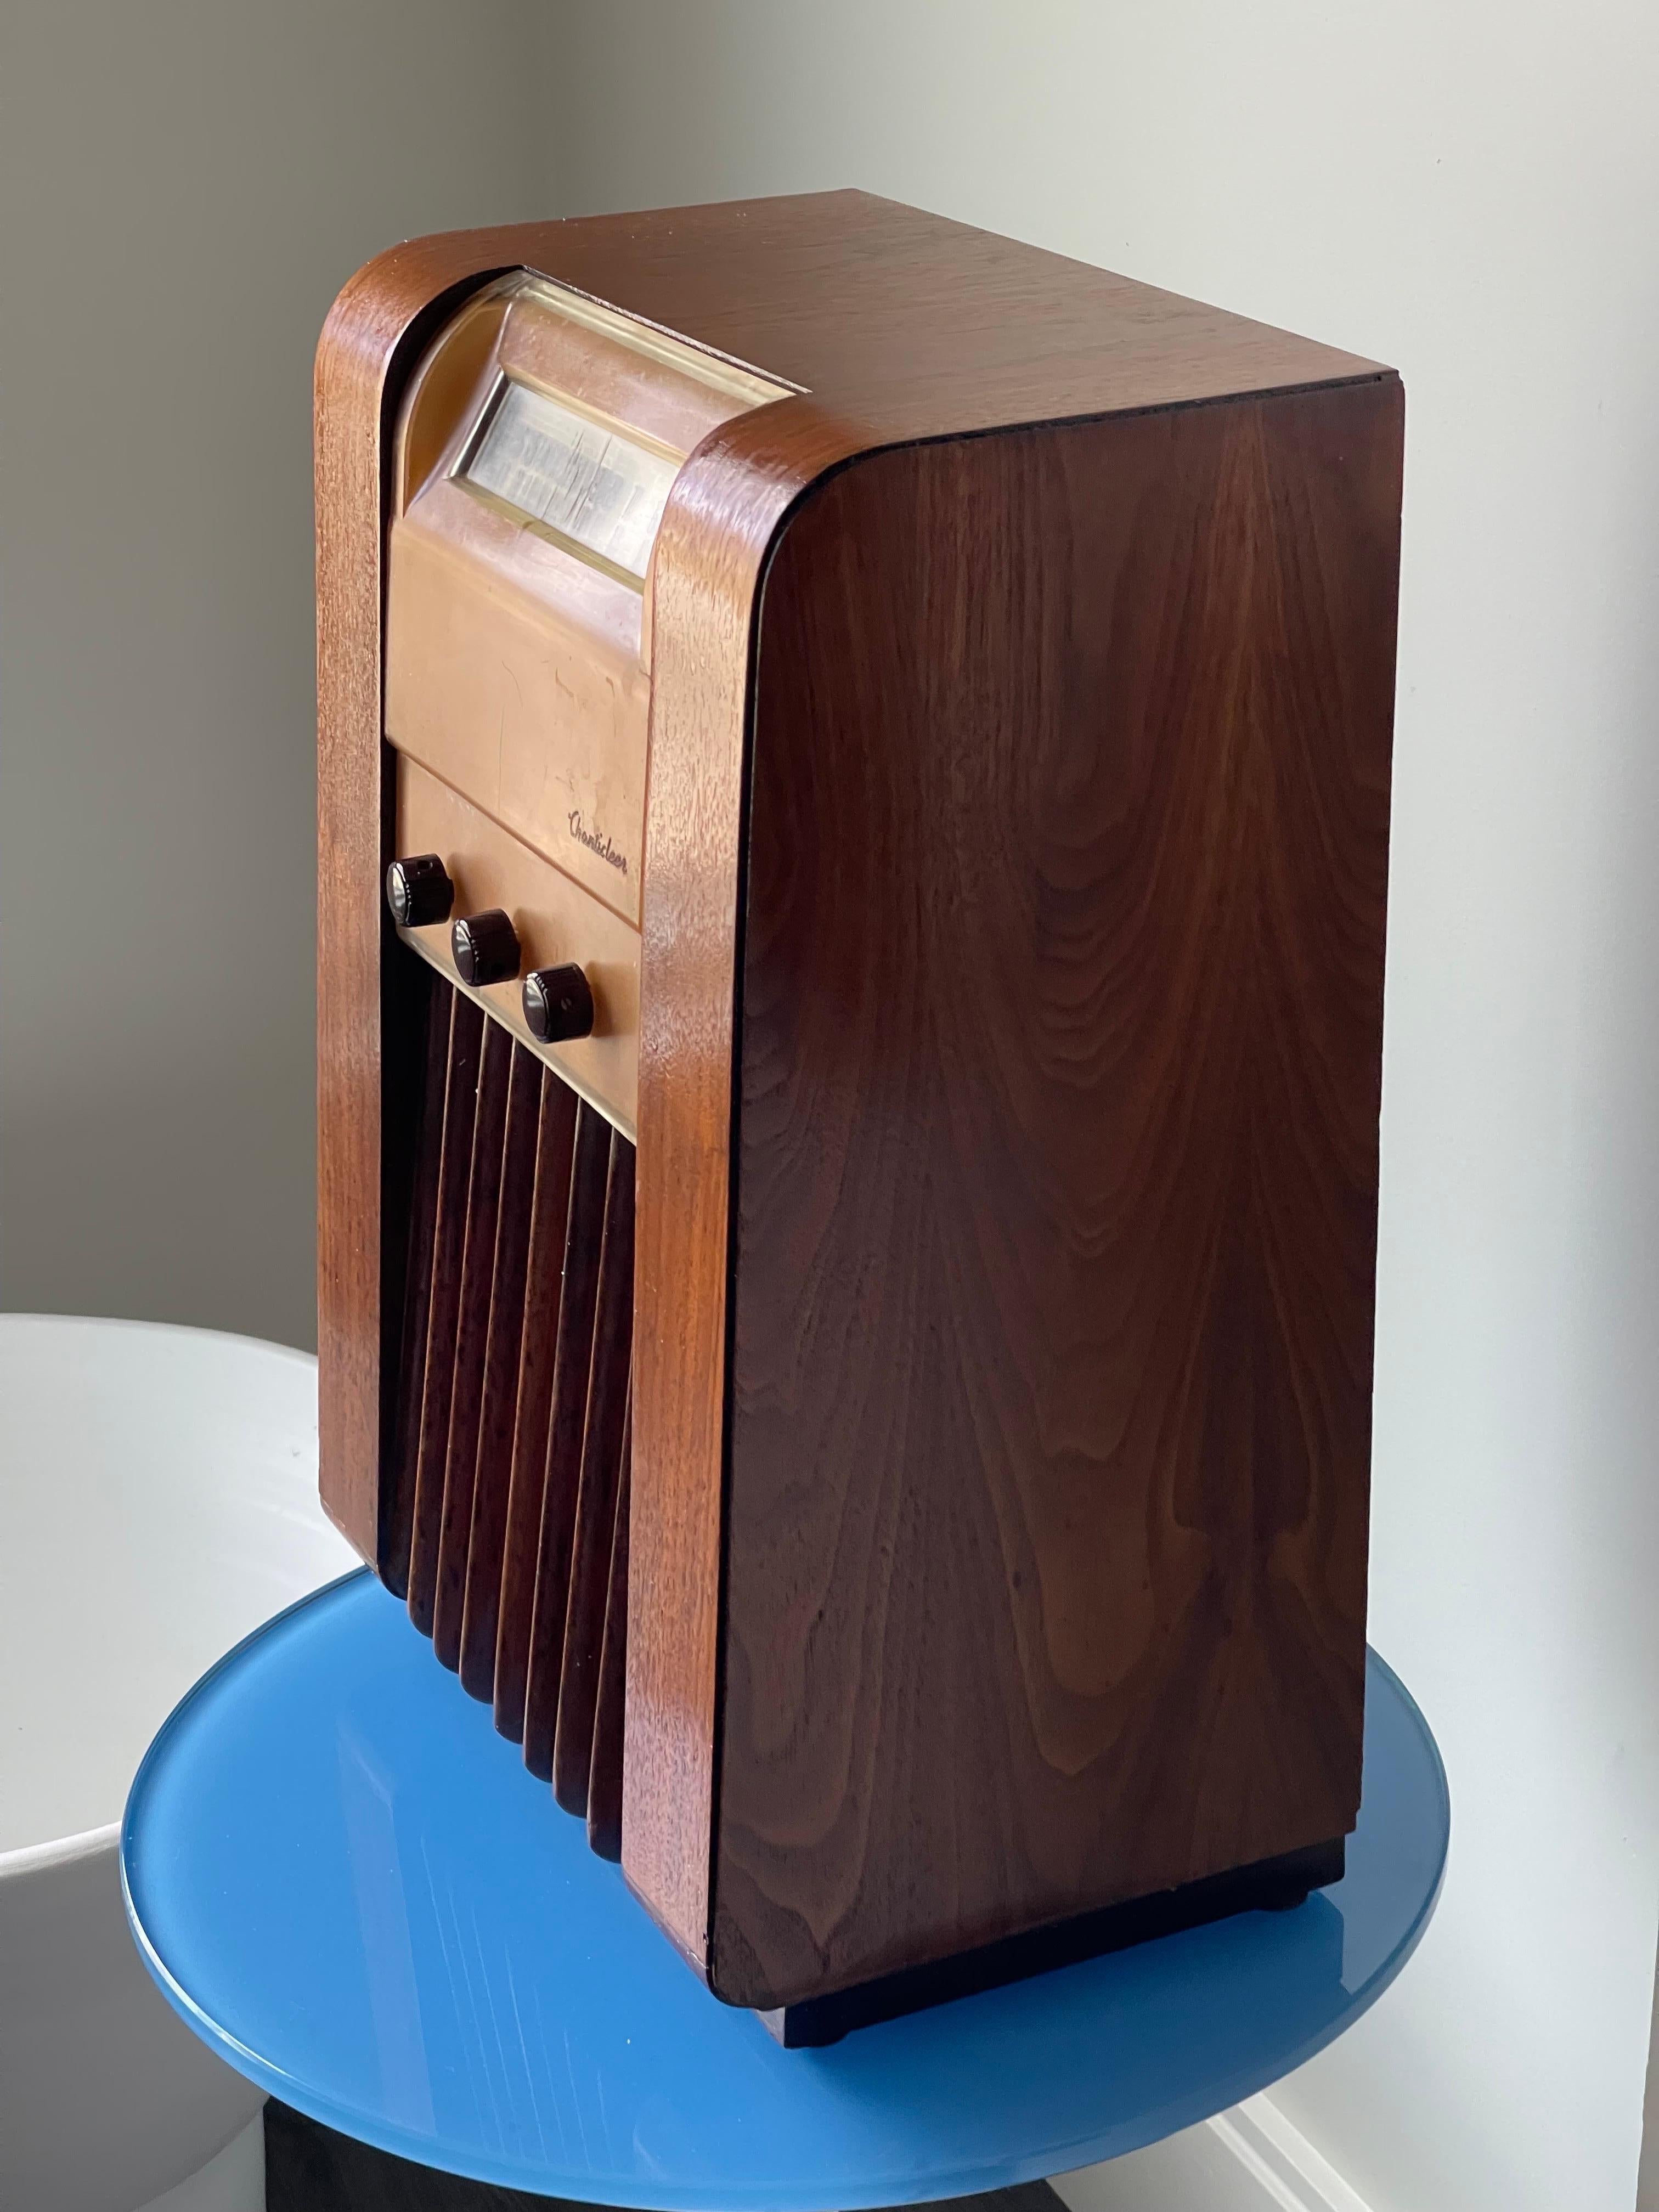 This radio was sold under several different labels such as Seiberling, Musicaire and Chanticleer. This one was sold as a Chanticleer, but made by Detrola. This model 576 is attributed to Alexander Girard since he was a radio designer there during